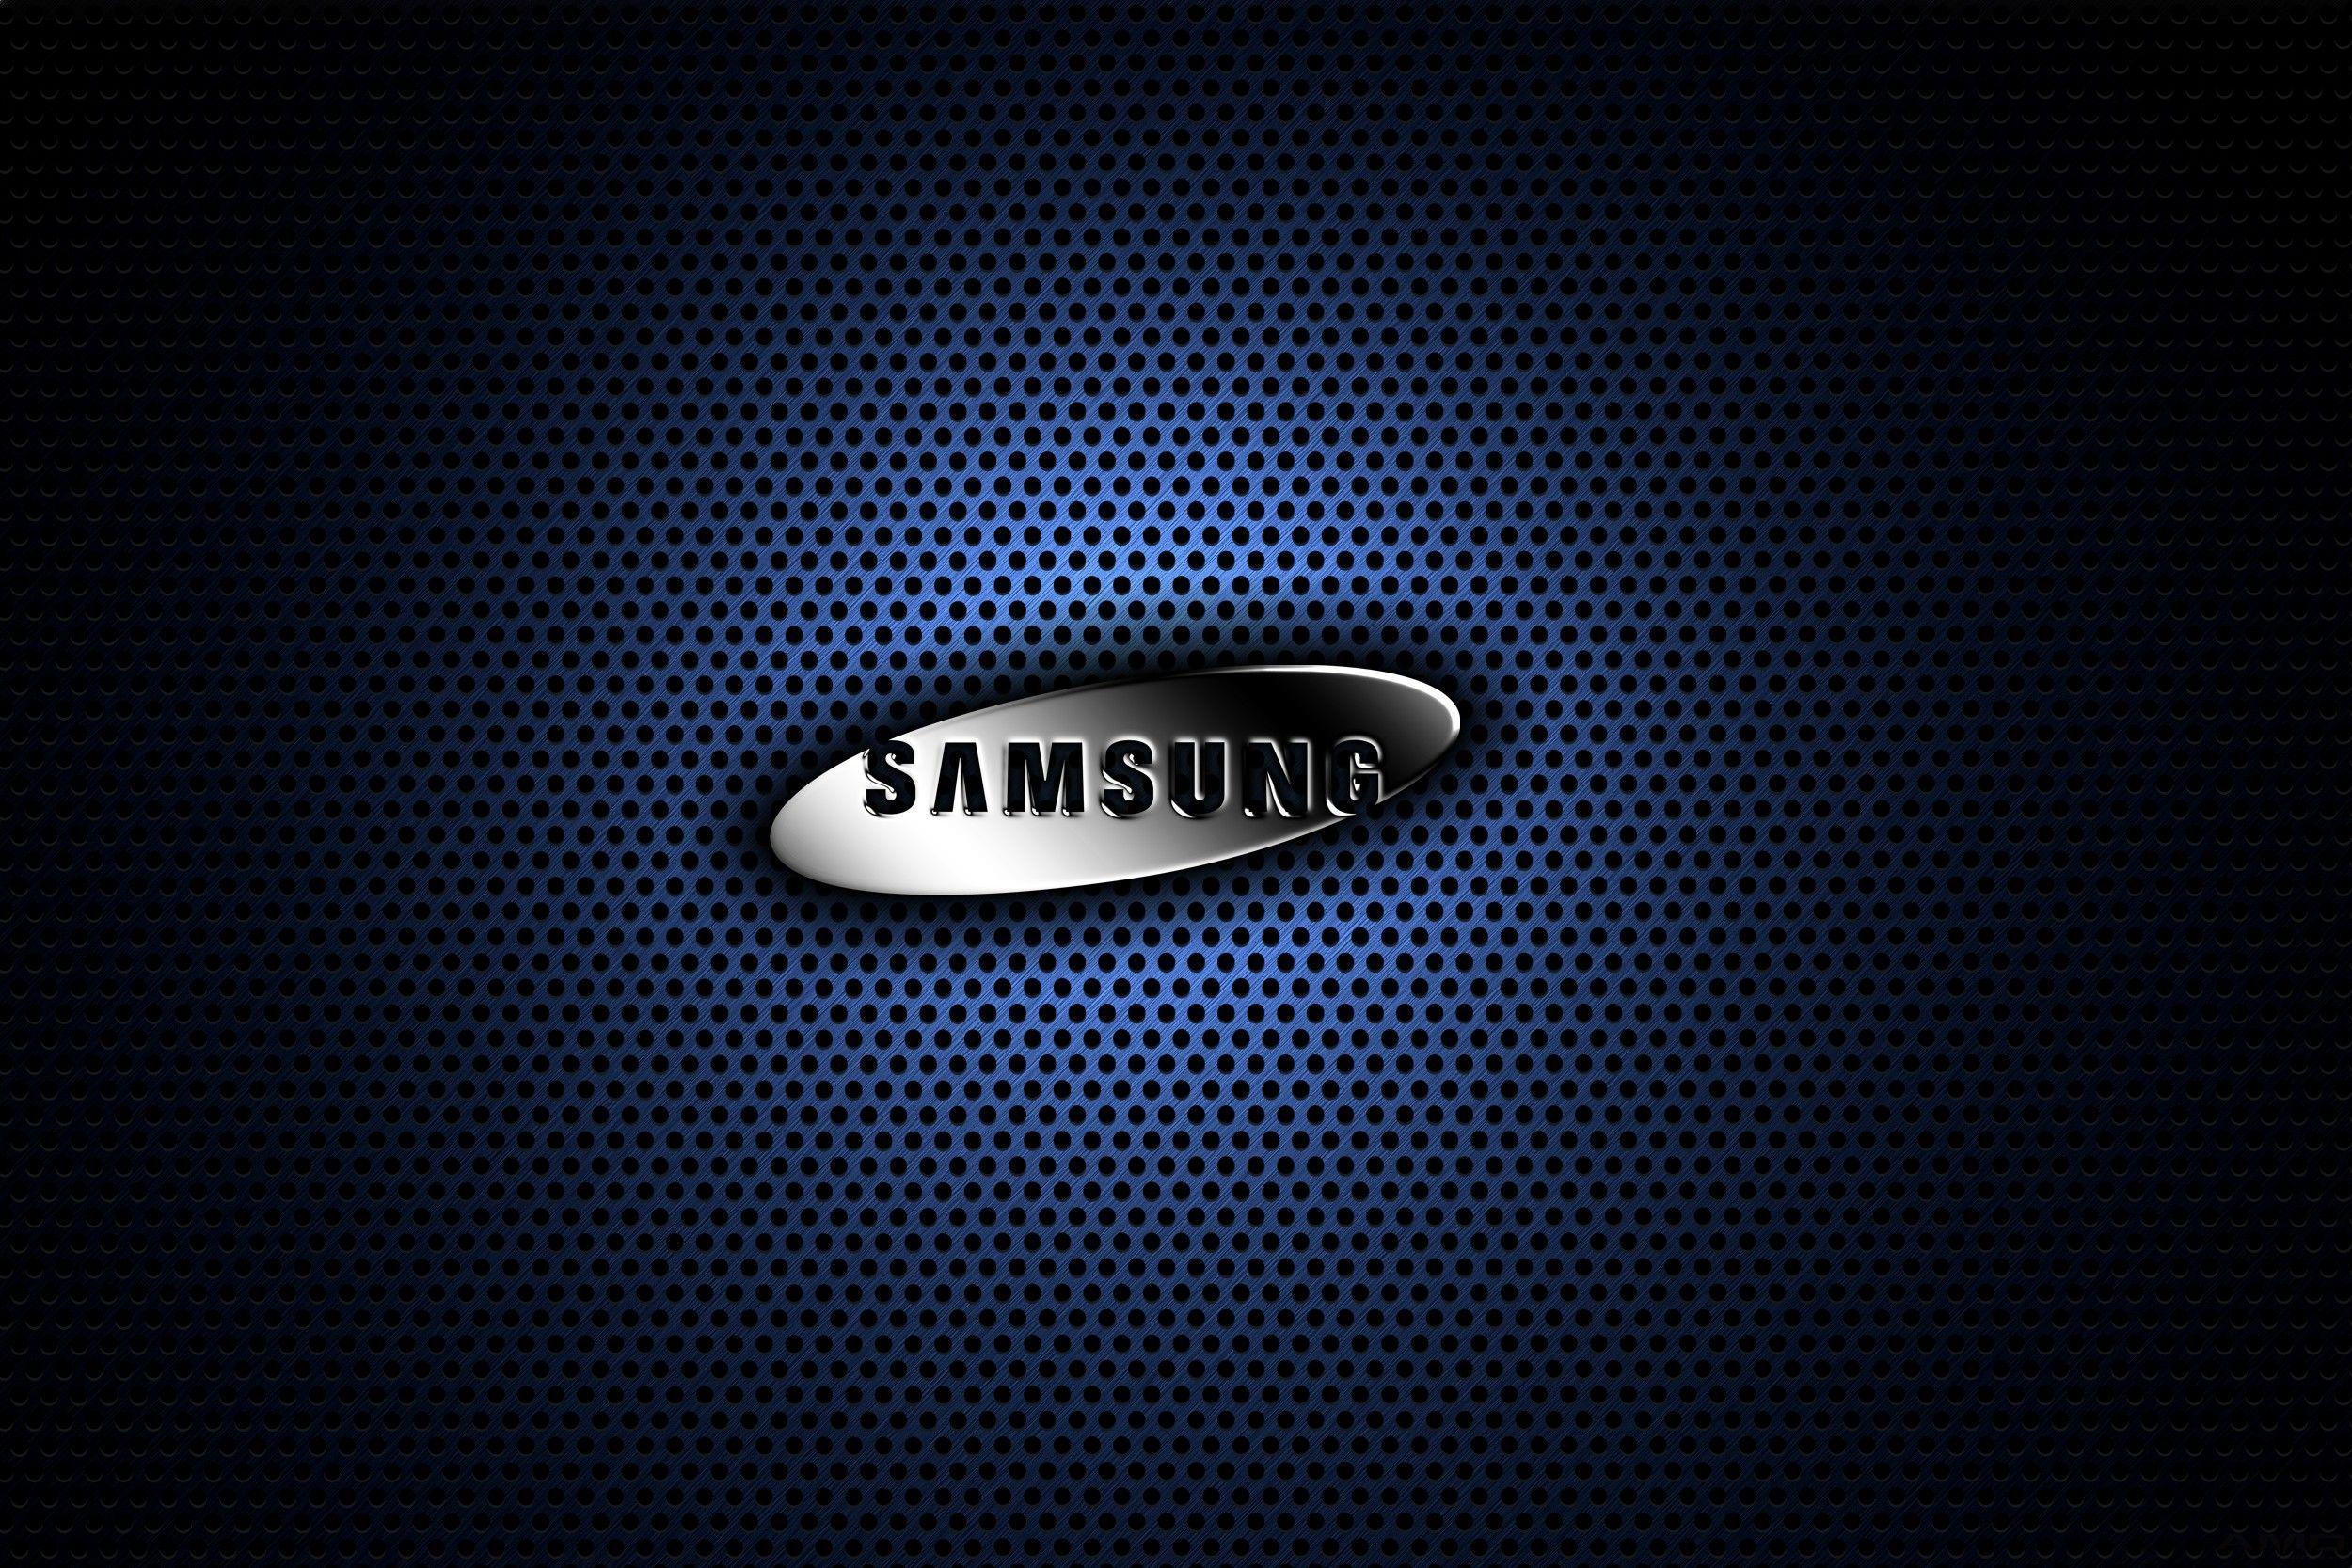 Cool Samsung Logo - Samsung Logo Image HD Wallpaper Background For PC Computer | Things ...